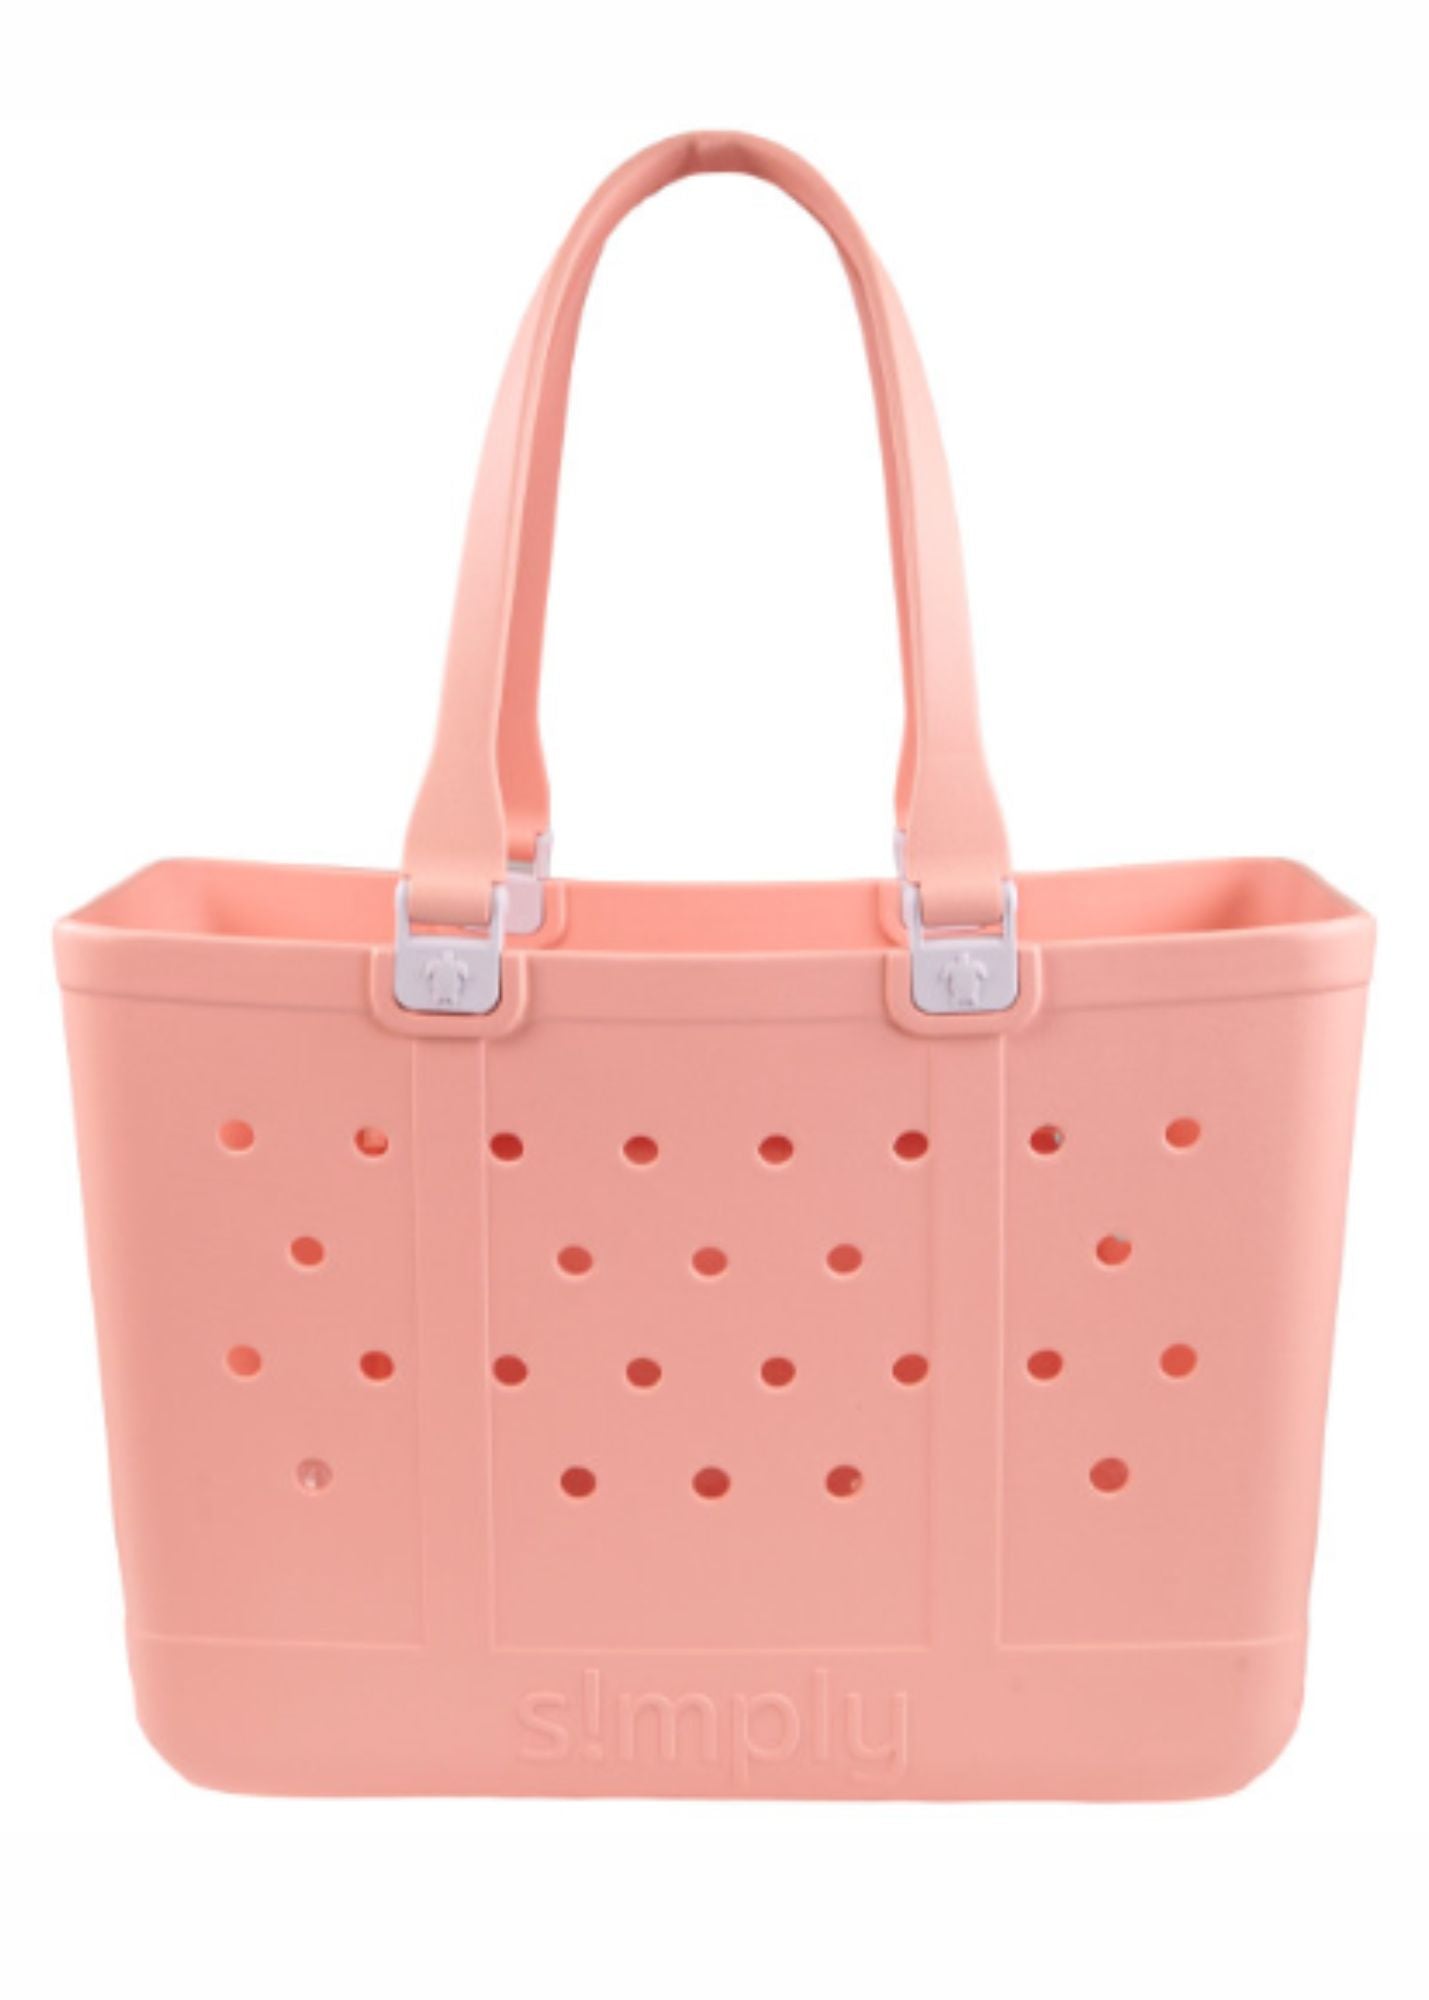 Simply Large Tote Bag Accessories Blossom